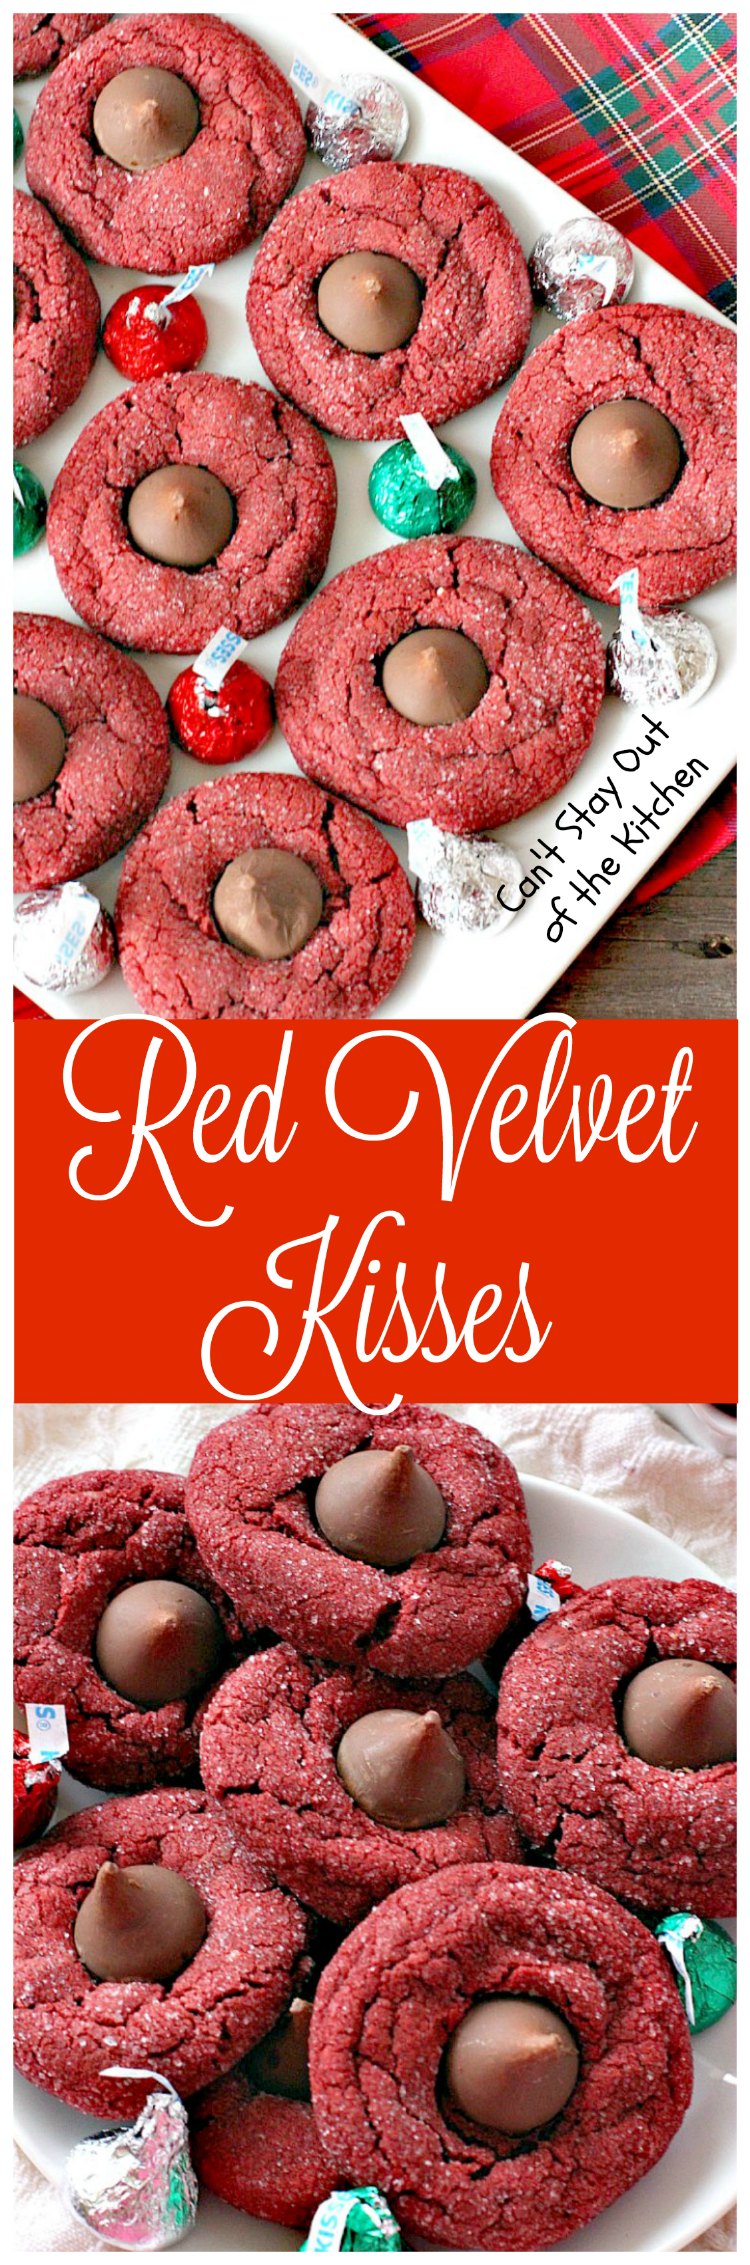 Red Velvet Kisses | Can't Stay Out of the Kitchen